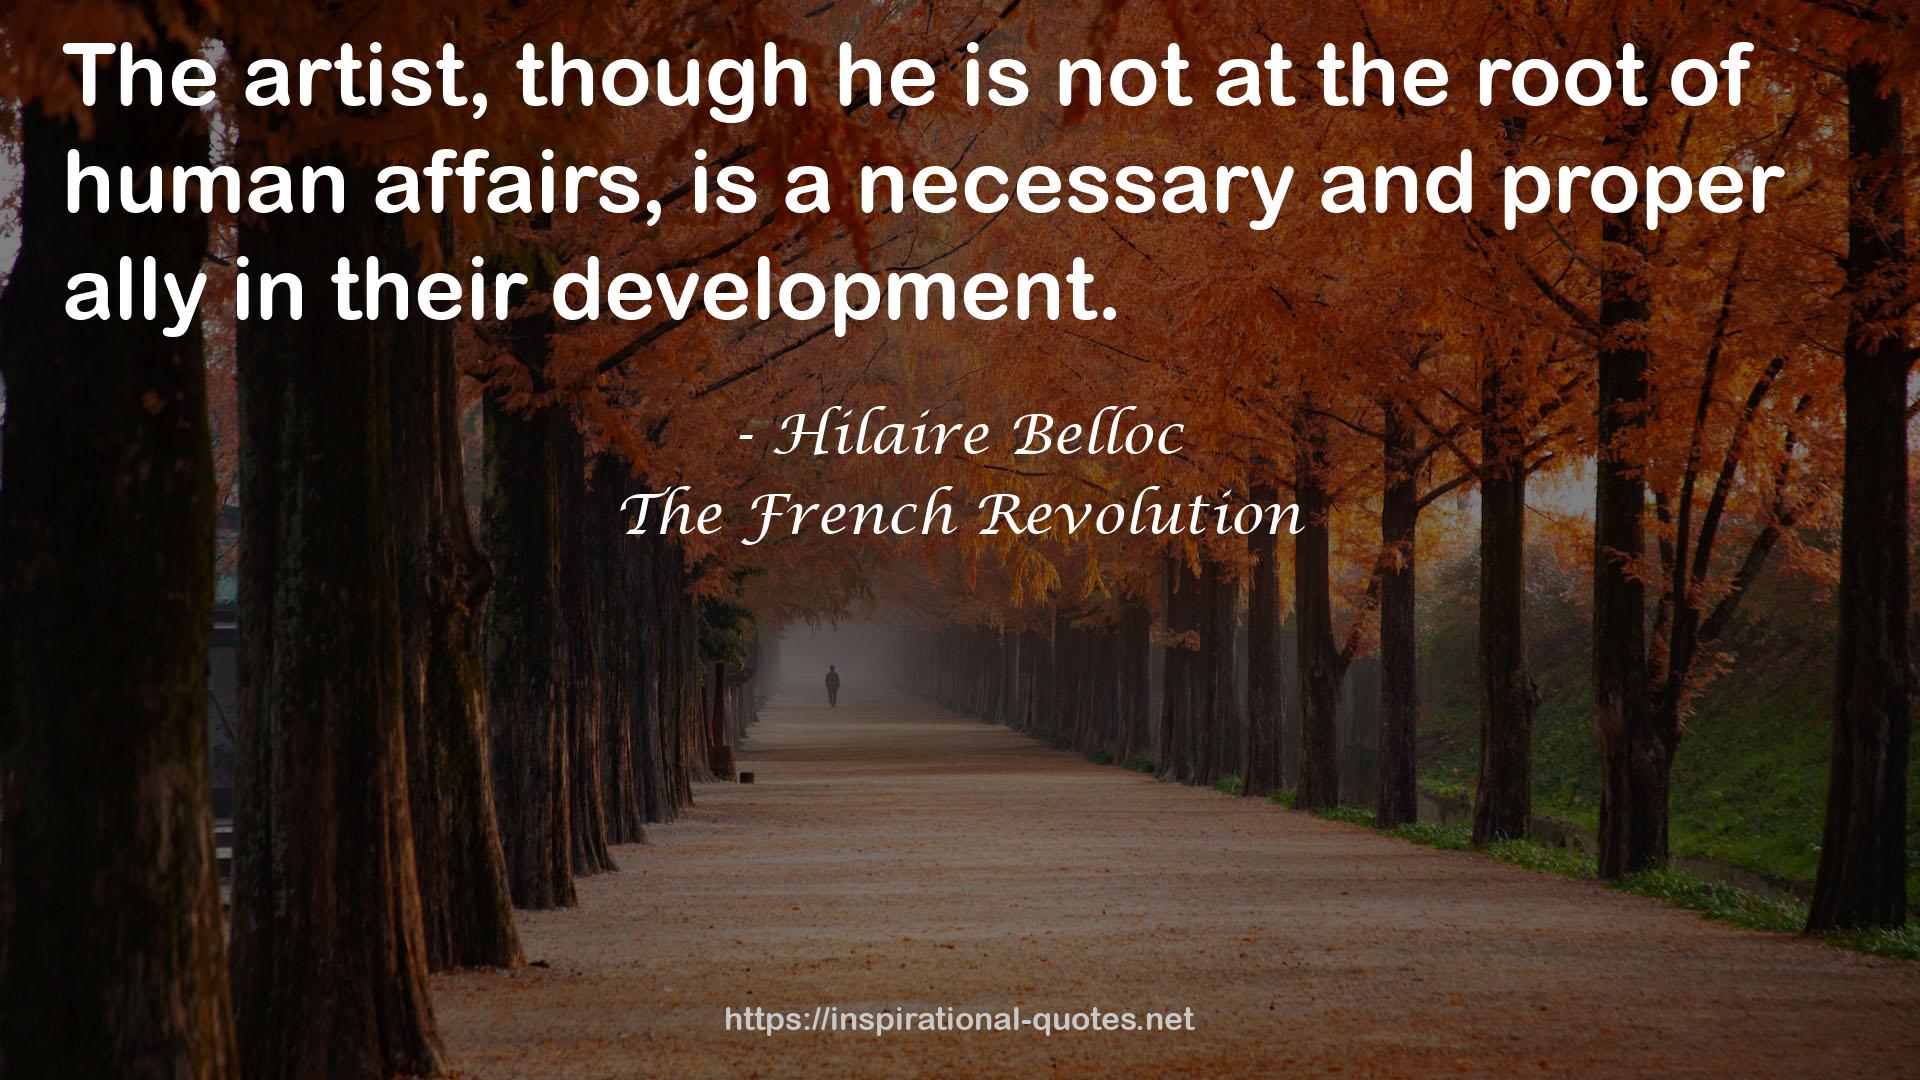 The French Revolution QUOTES